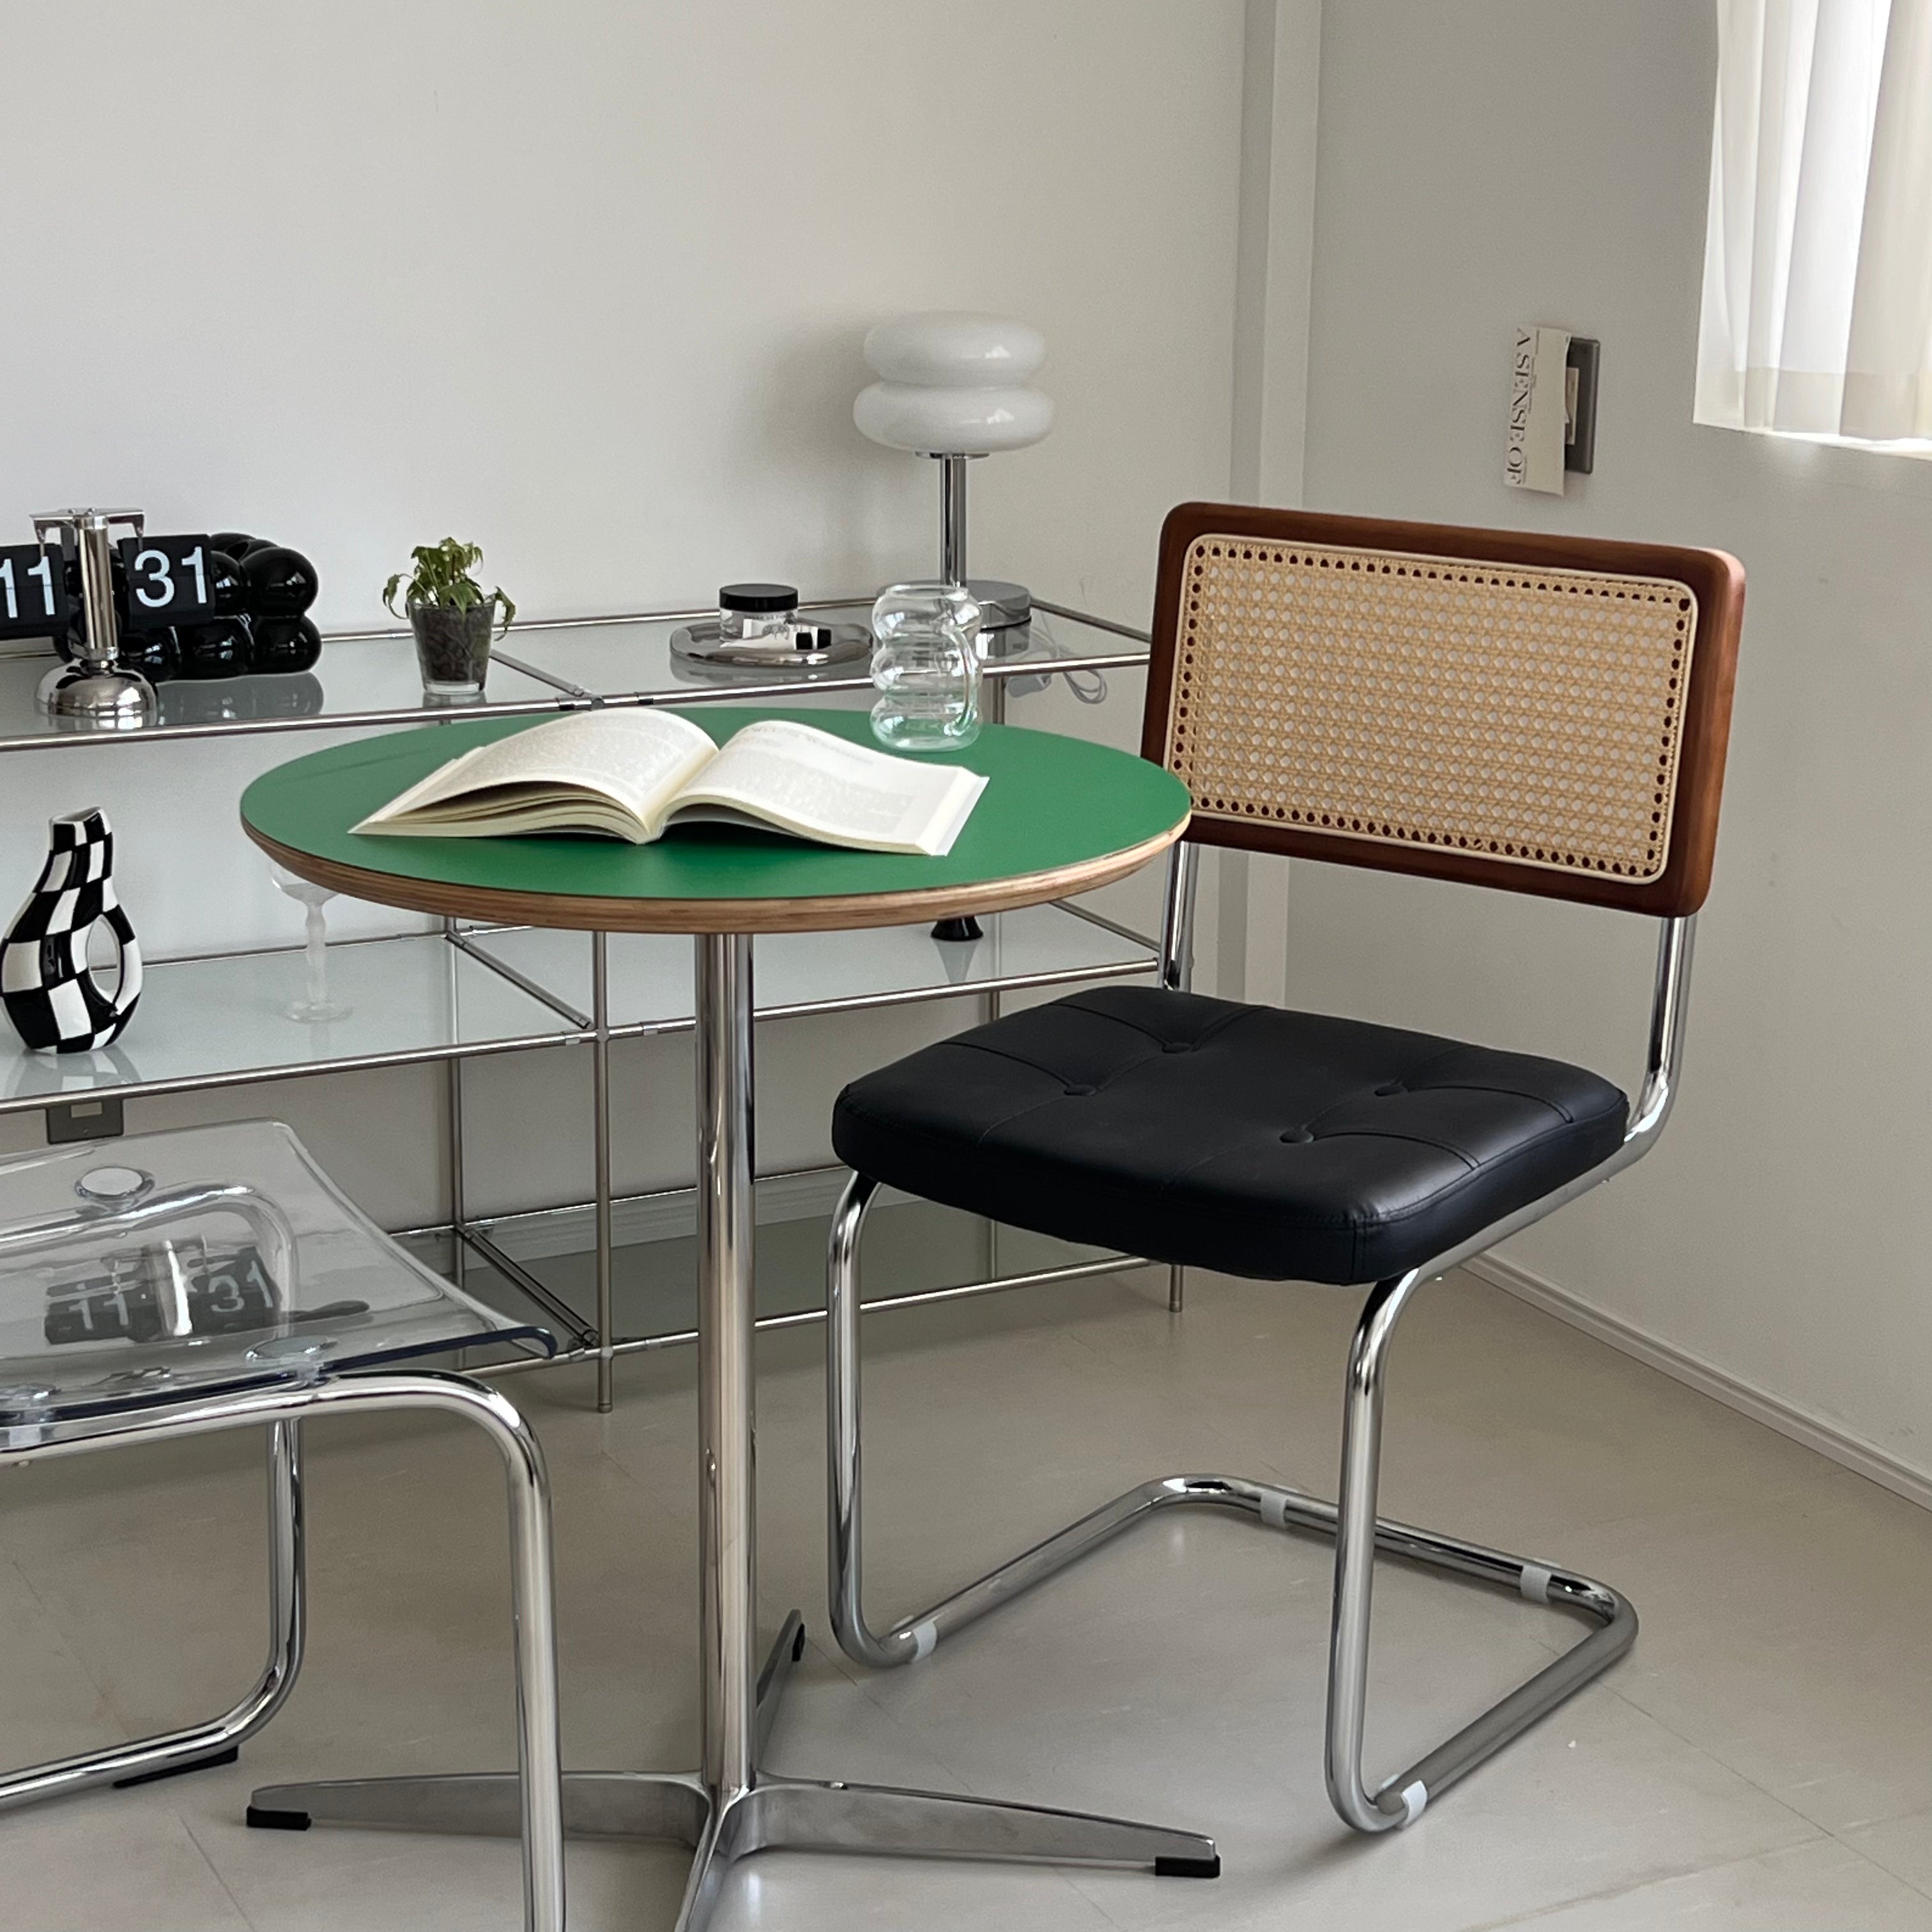 T24 Retro cafe table